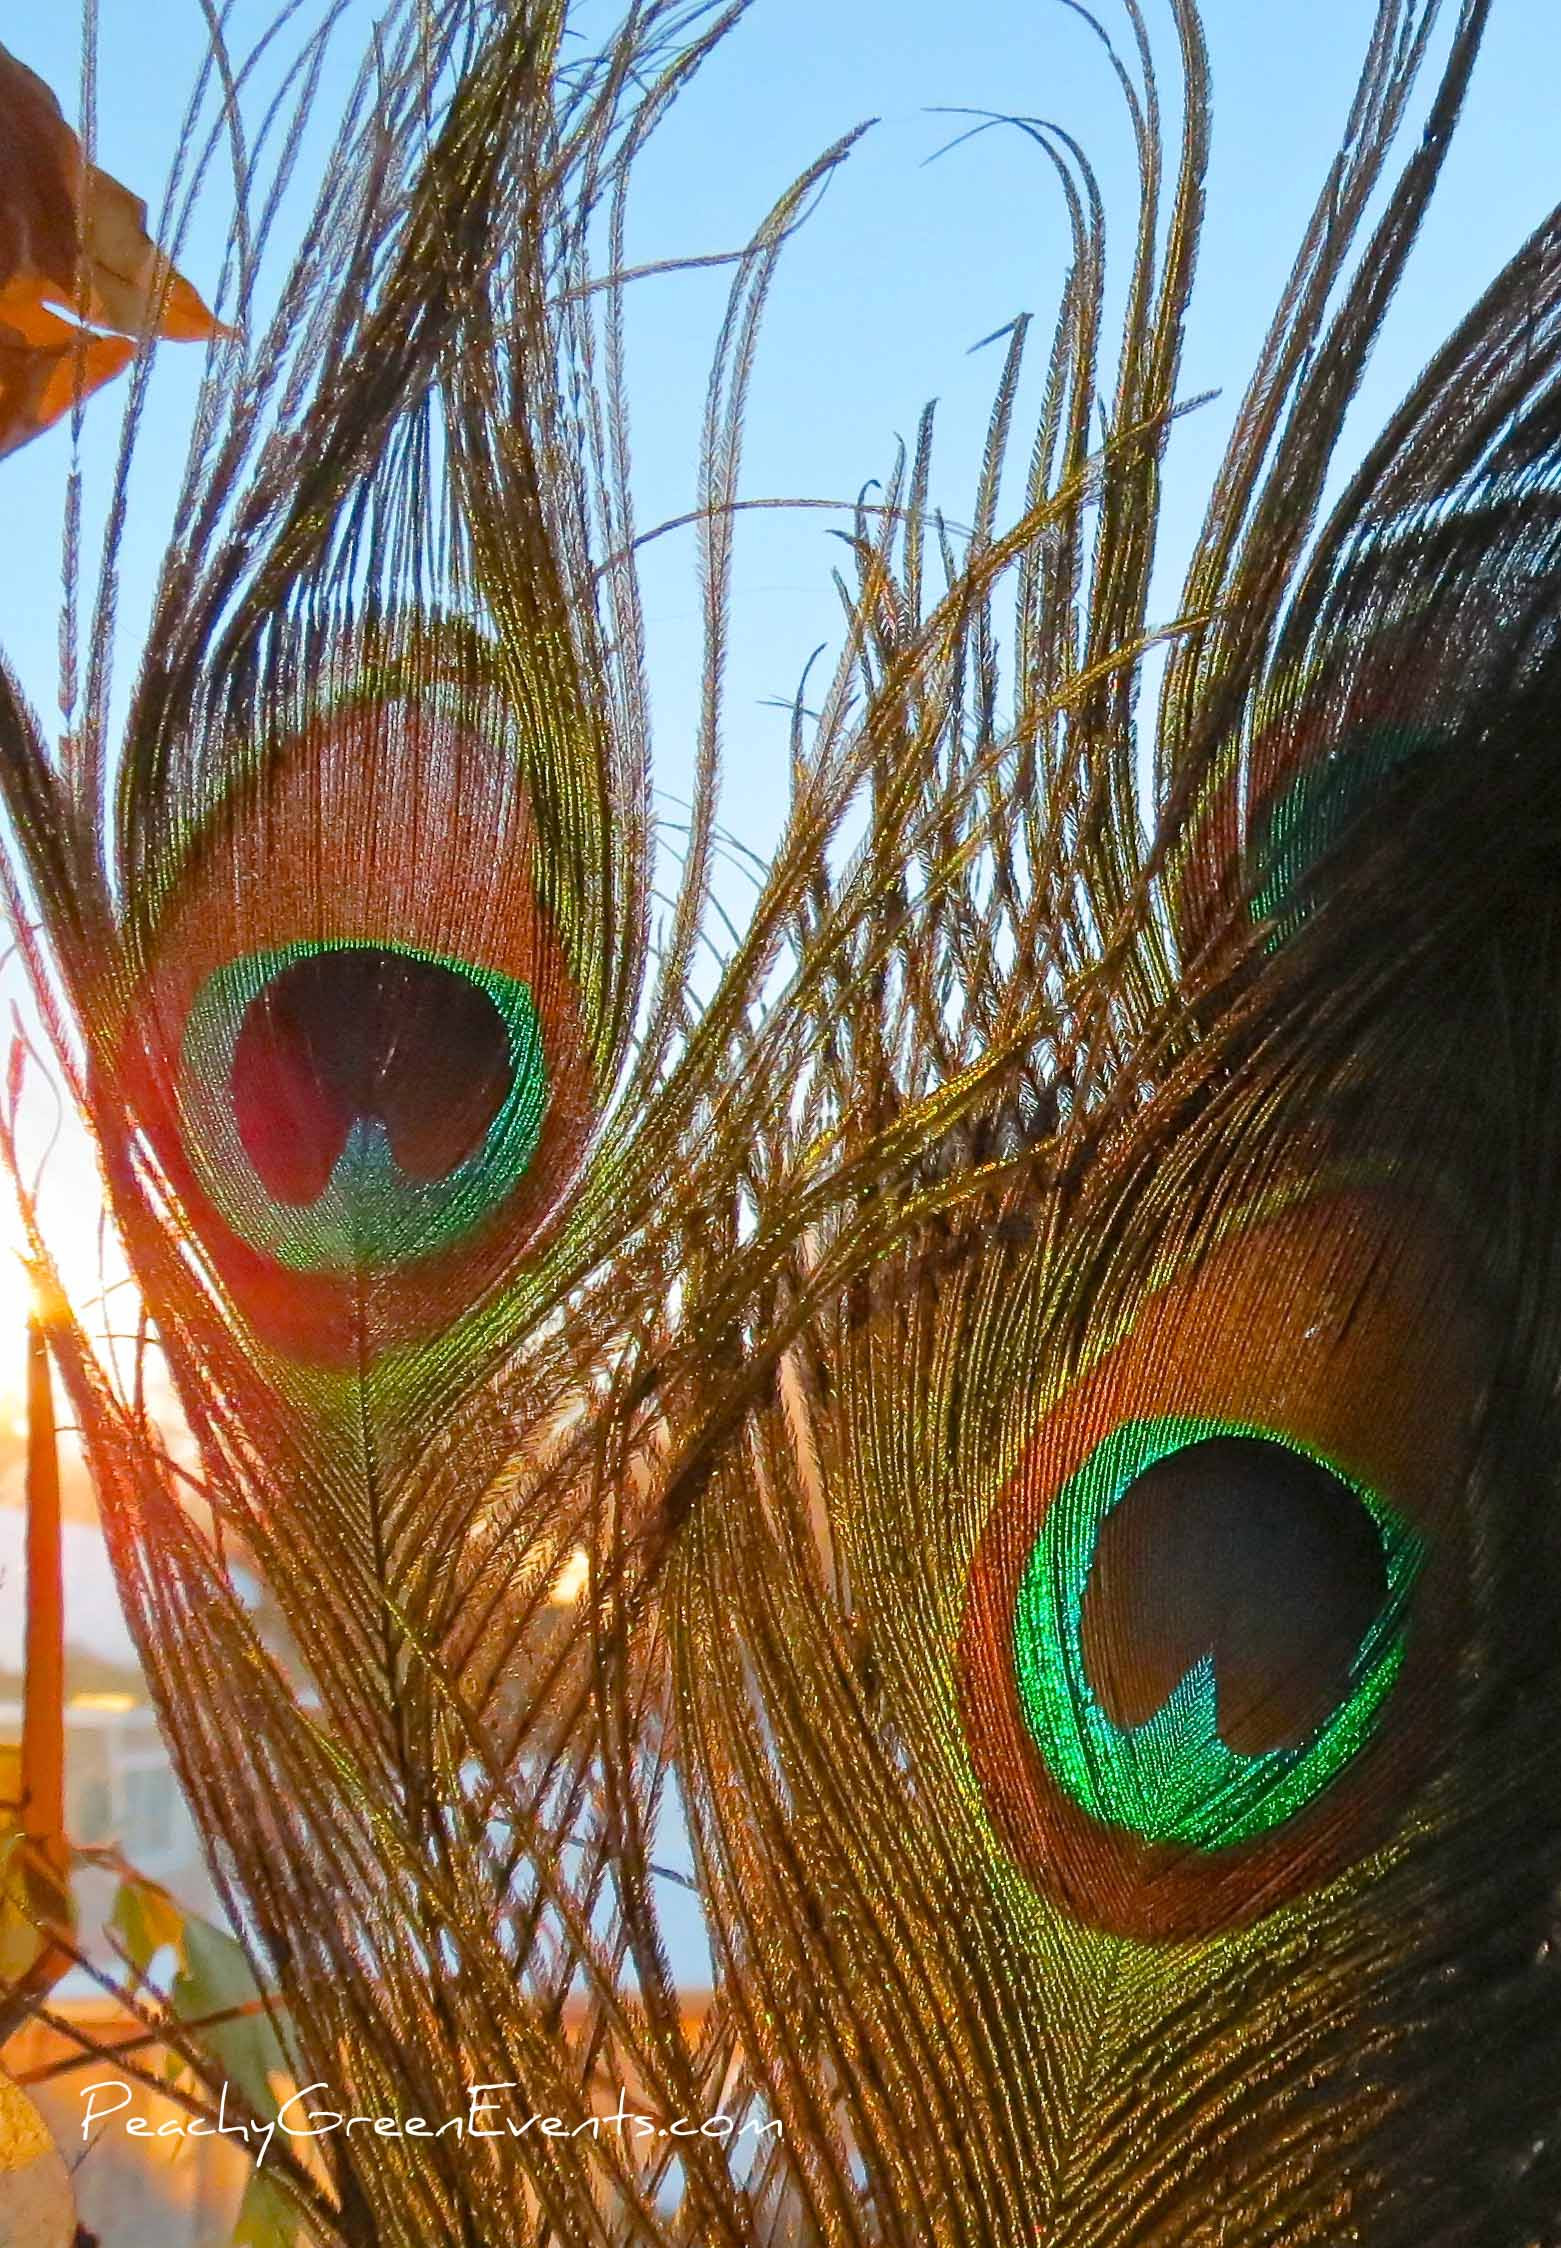 17 Recommended Peacock Feathers In Vase Ideas 2024 free download peacock feathers in vase ideas of 32e280b3 peacock feathers peachy green events for 32e280b3 peacock feathers